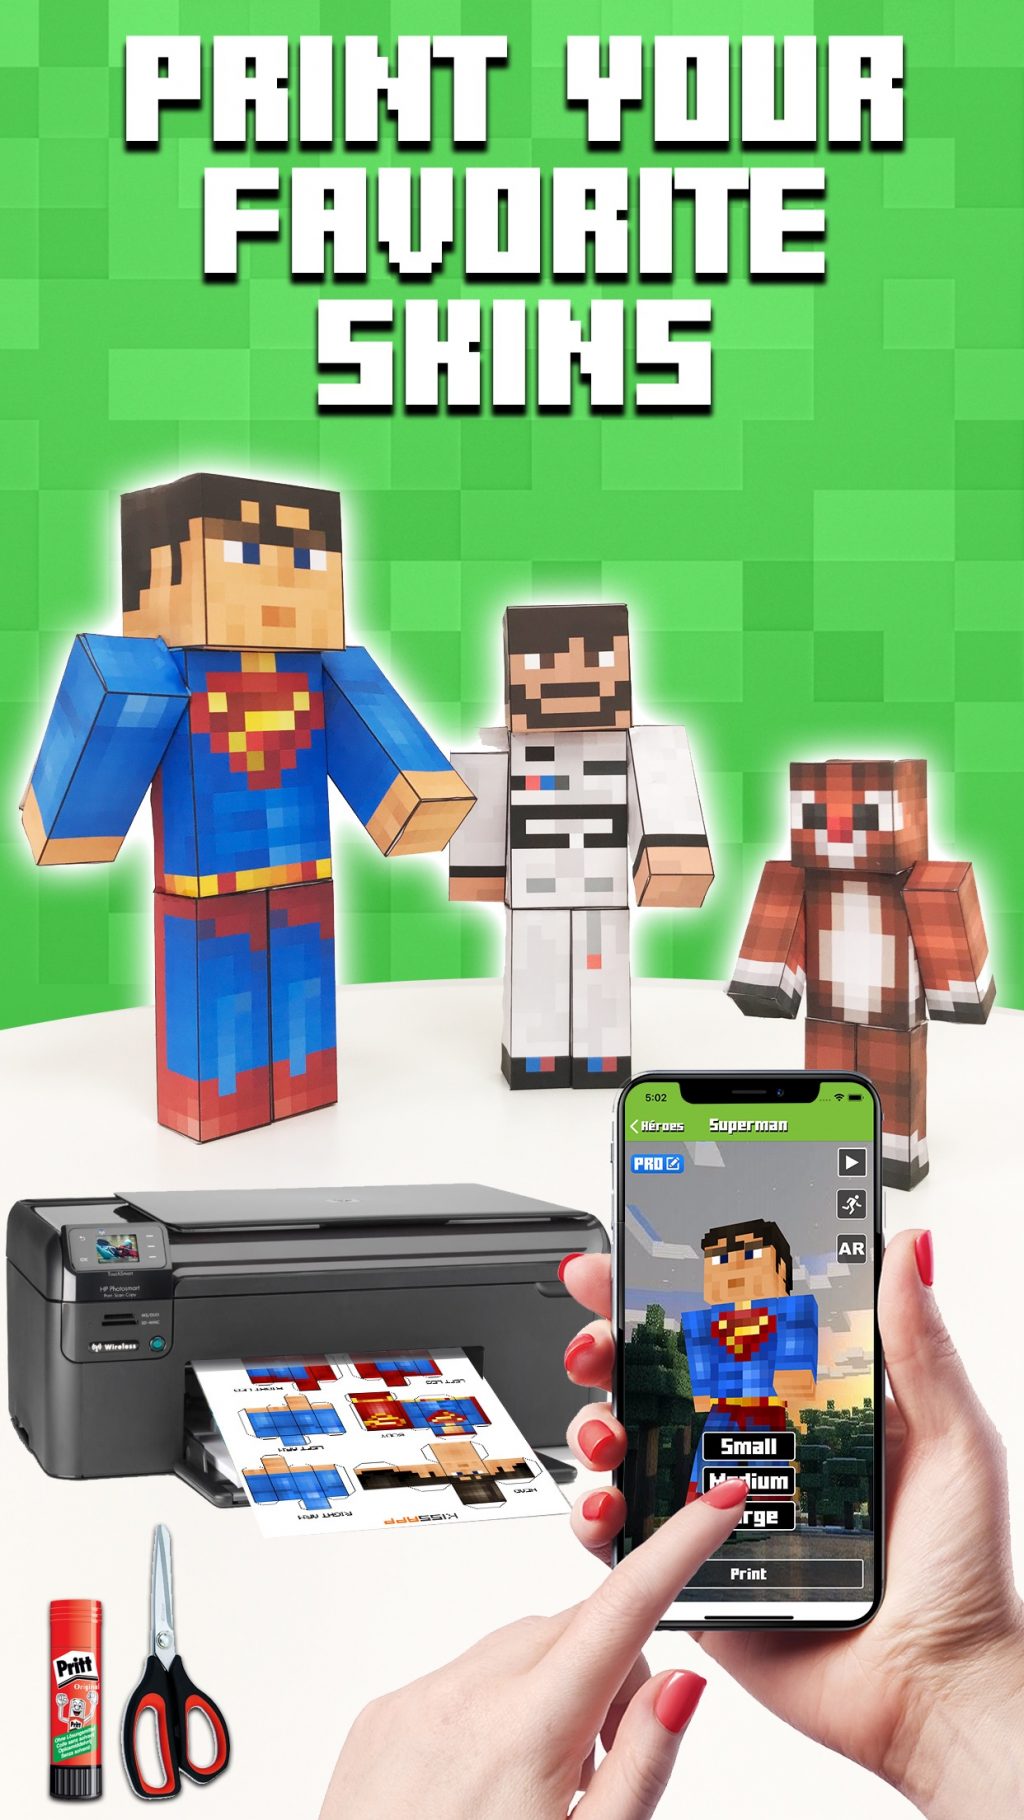 PaperMinecraft - Print Your Skin